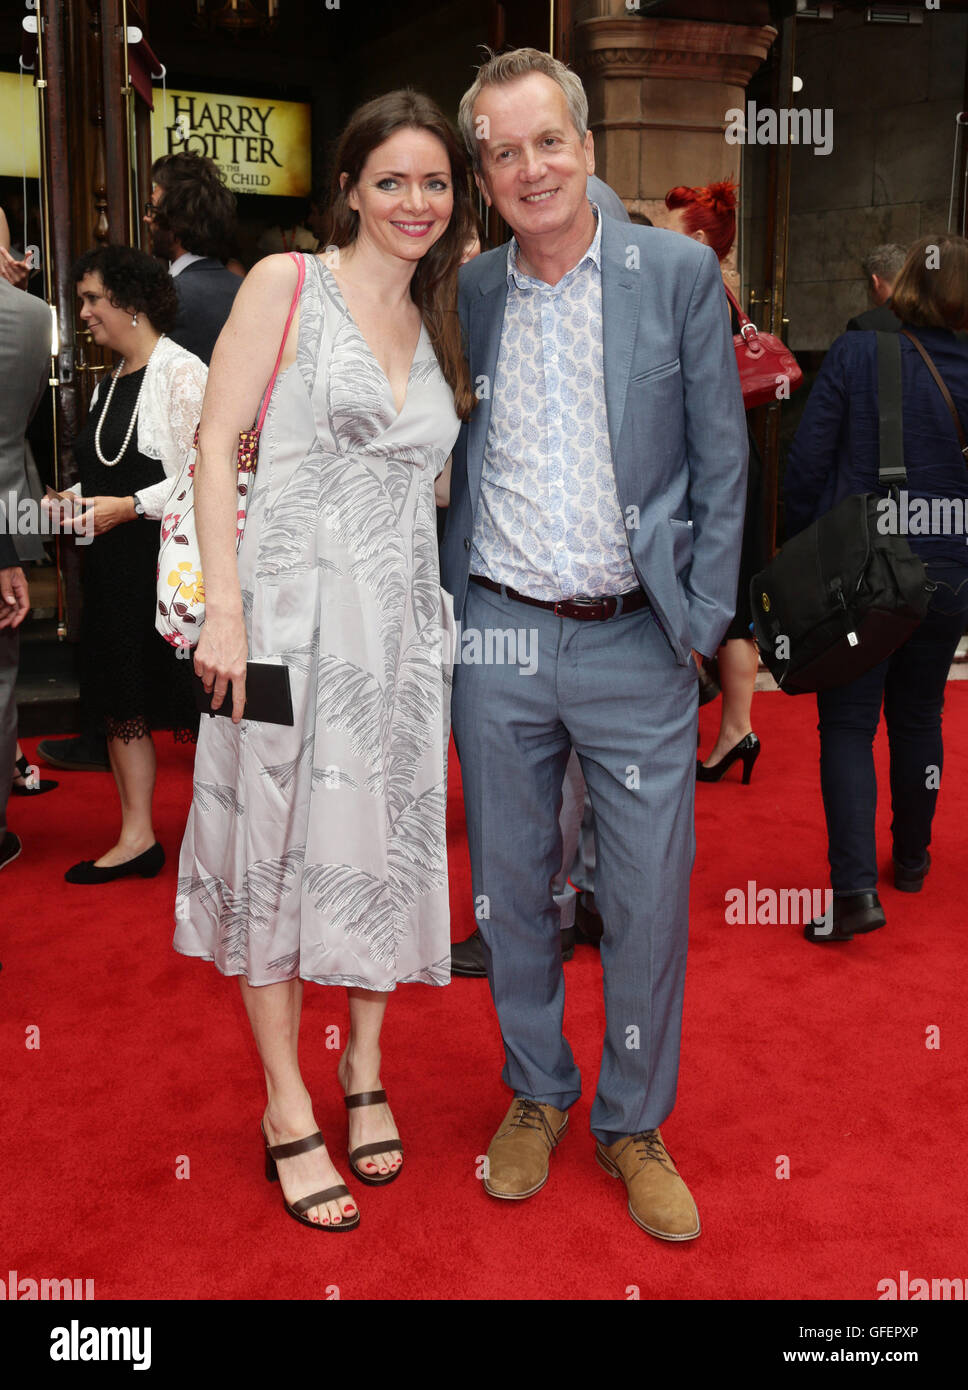 Frank Skinner and girlfriend Cath Mason arriving for the opening gala performance of Harry Potter and The Cursed Child, at the Palace Theatre in London. Stock Photo